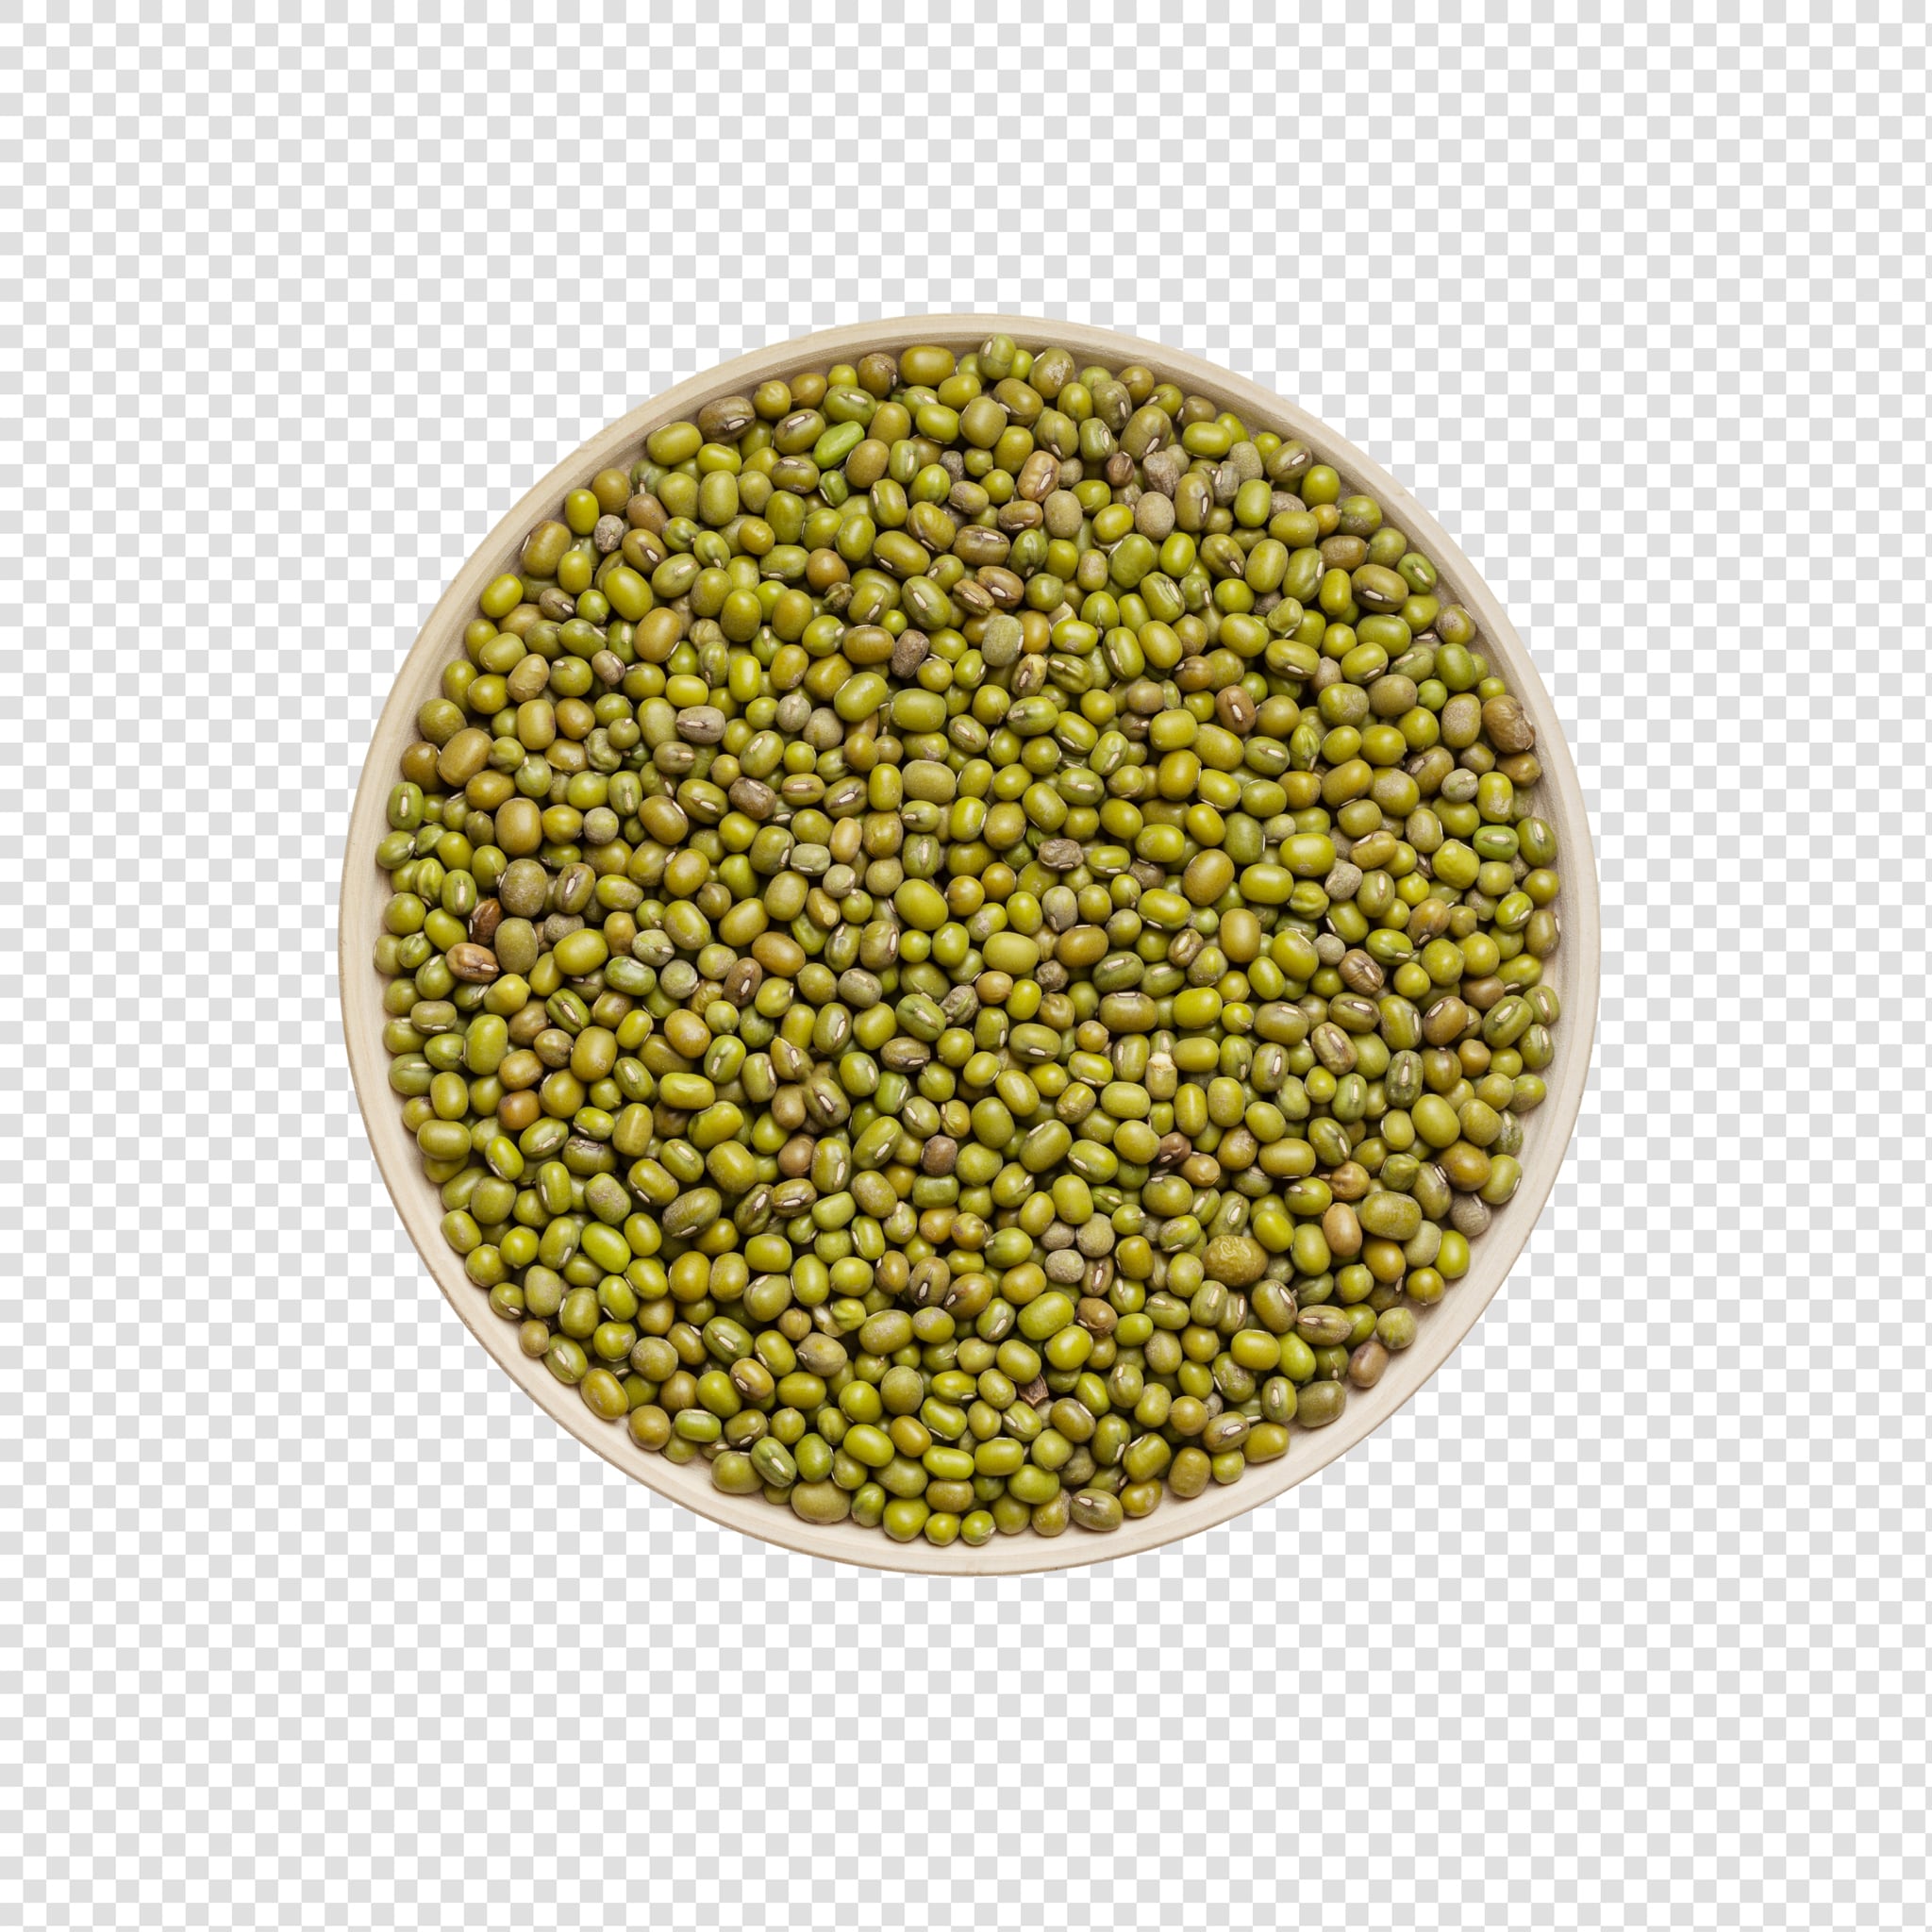 Isolated Grains psd image